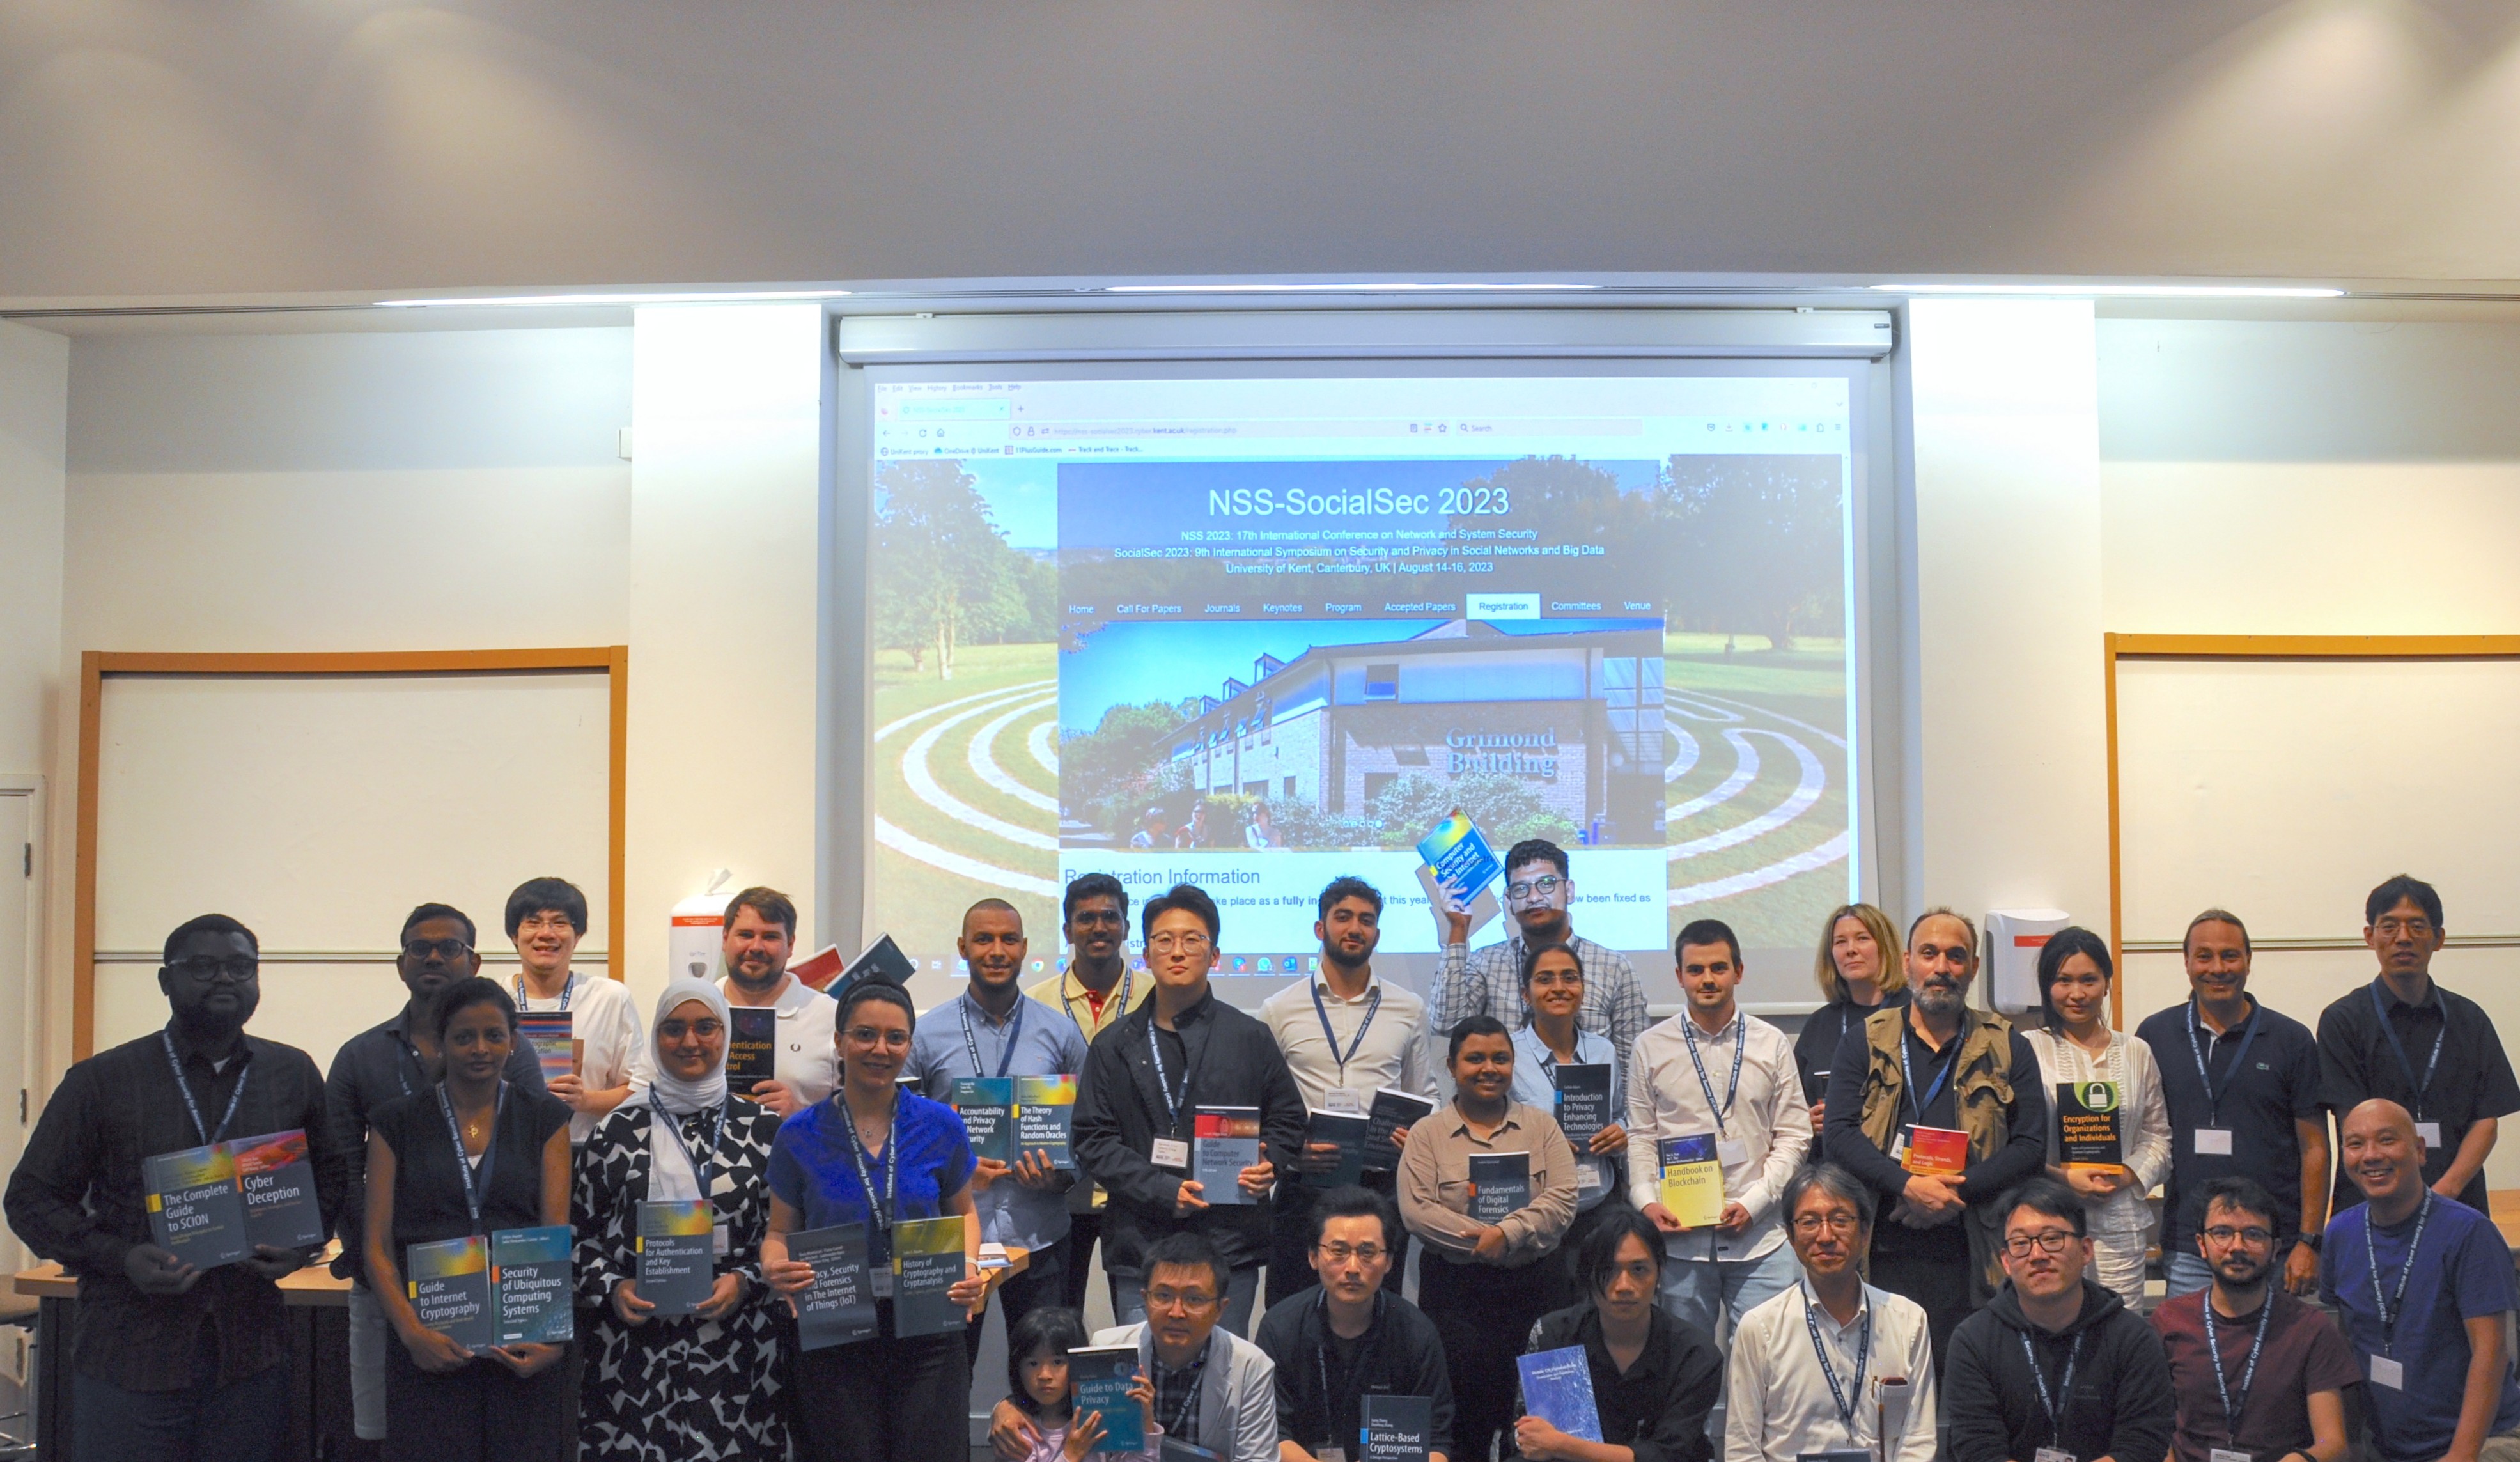 Group Photo on Day 3 of NSS-SocialSec 2023 inside Grimond Lecture Theatre 2 (GLT2)